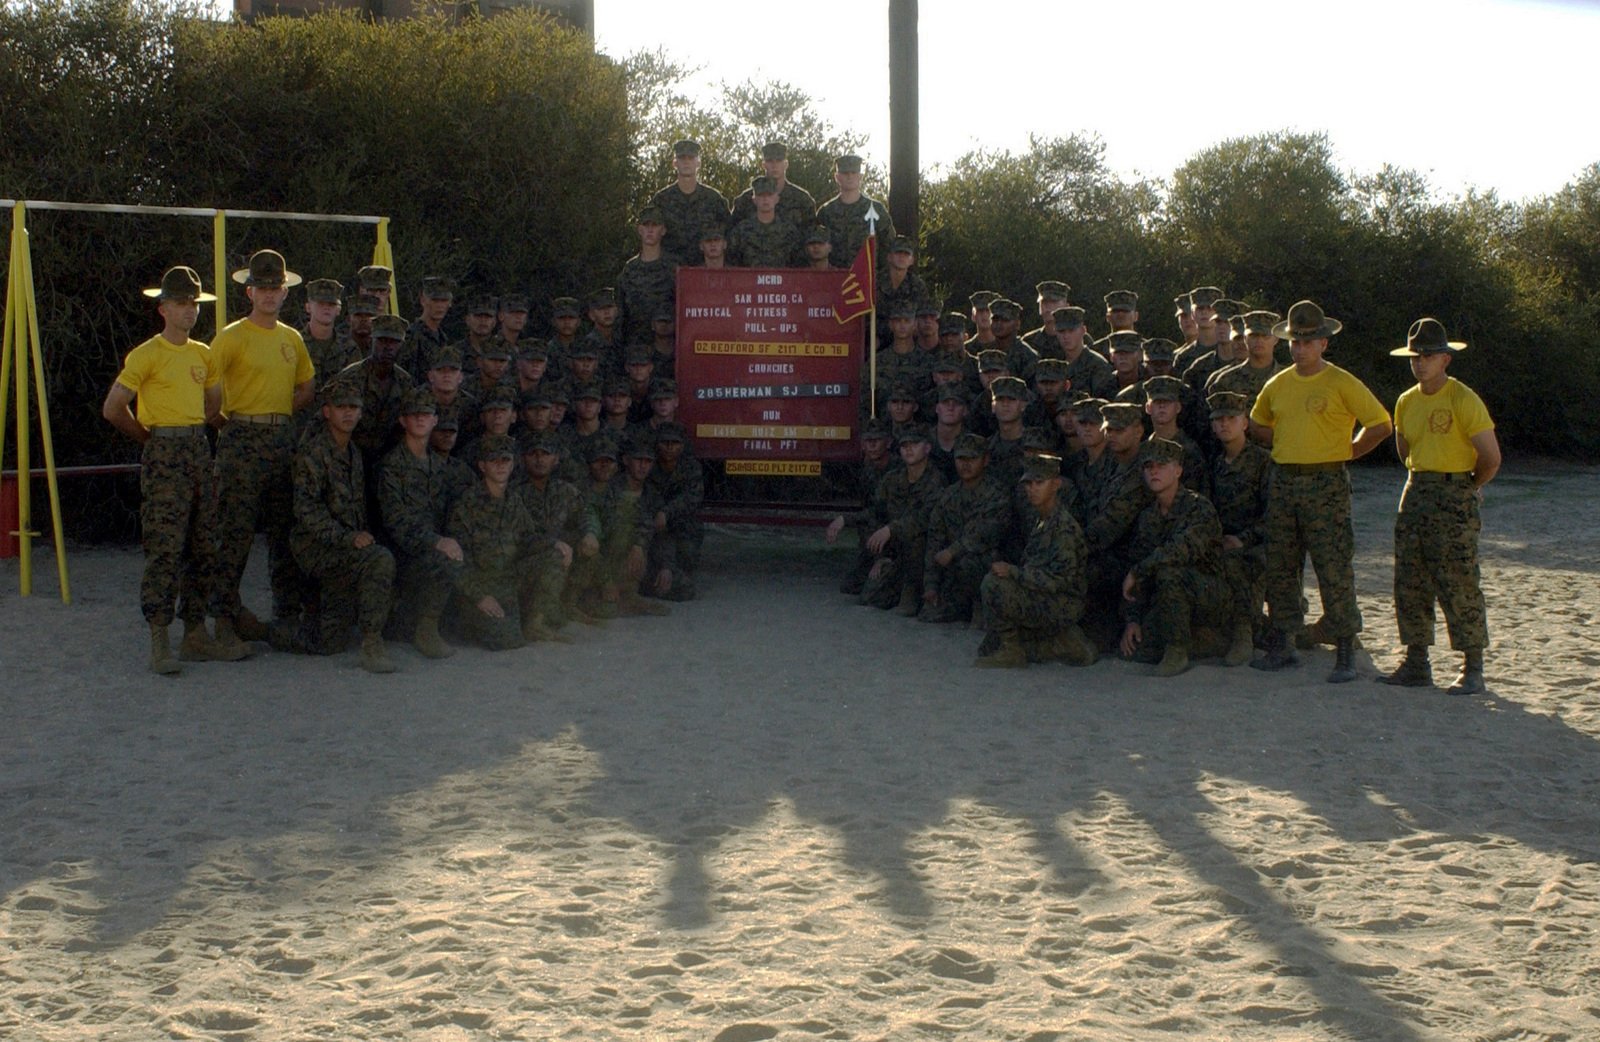 Marine Corps Recruit Depot Mcrd San Diego 1st Battalion E Company Poses For Ce2c02 1600 